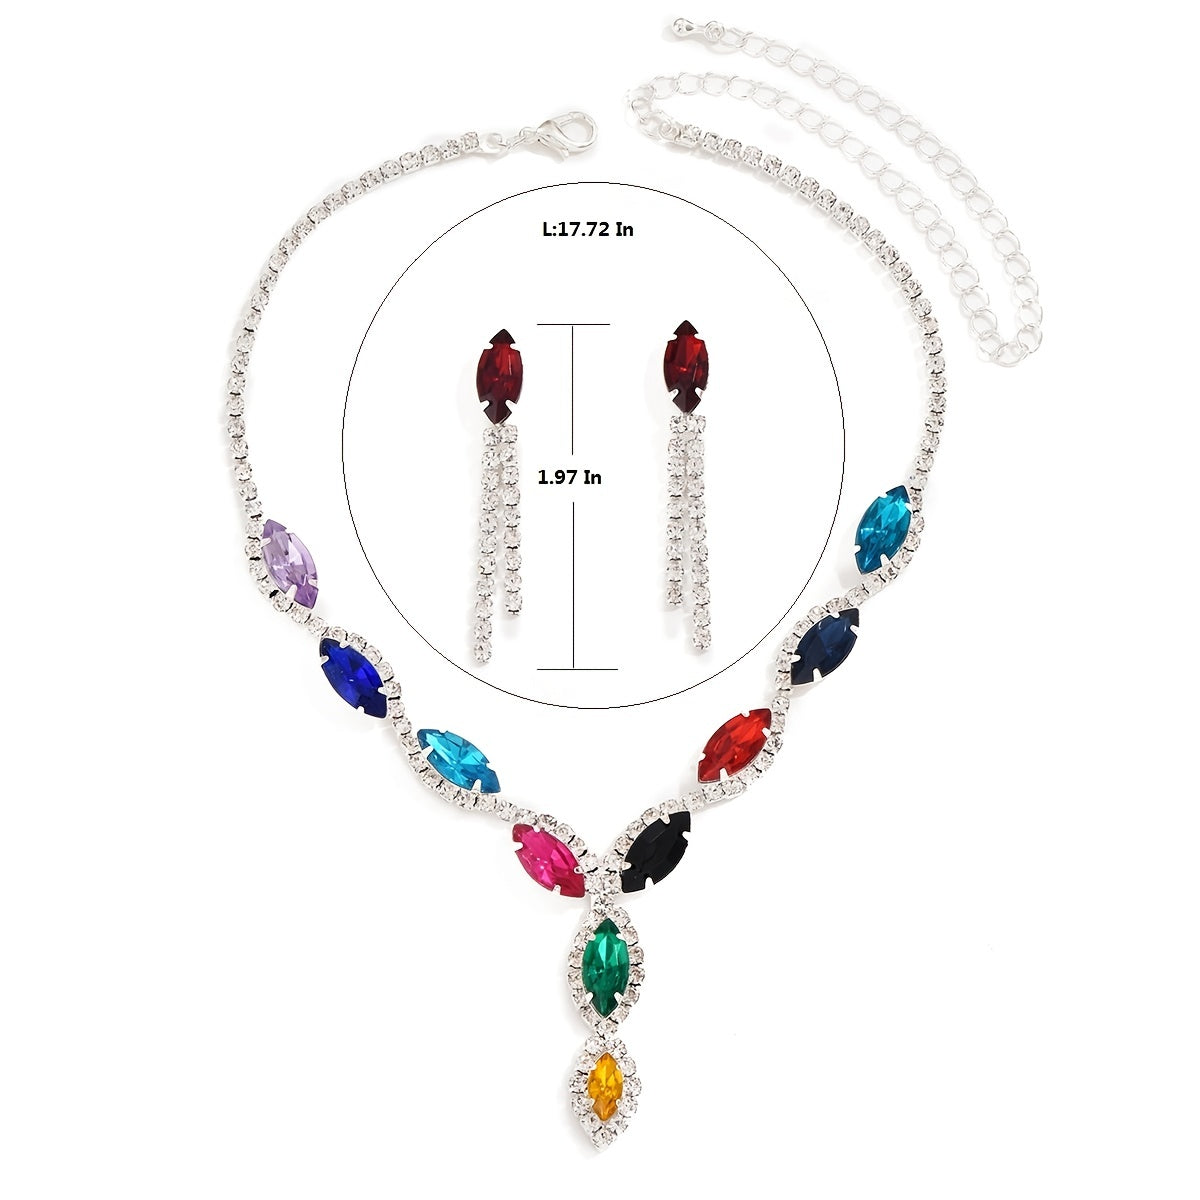 2 pieces Stunning Women's Crystal Necklace and Earrings Set - Vibrant Colors and Sparkling Crystals for a Glamorous Look